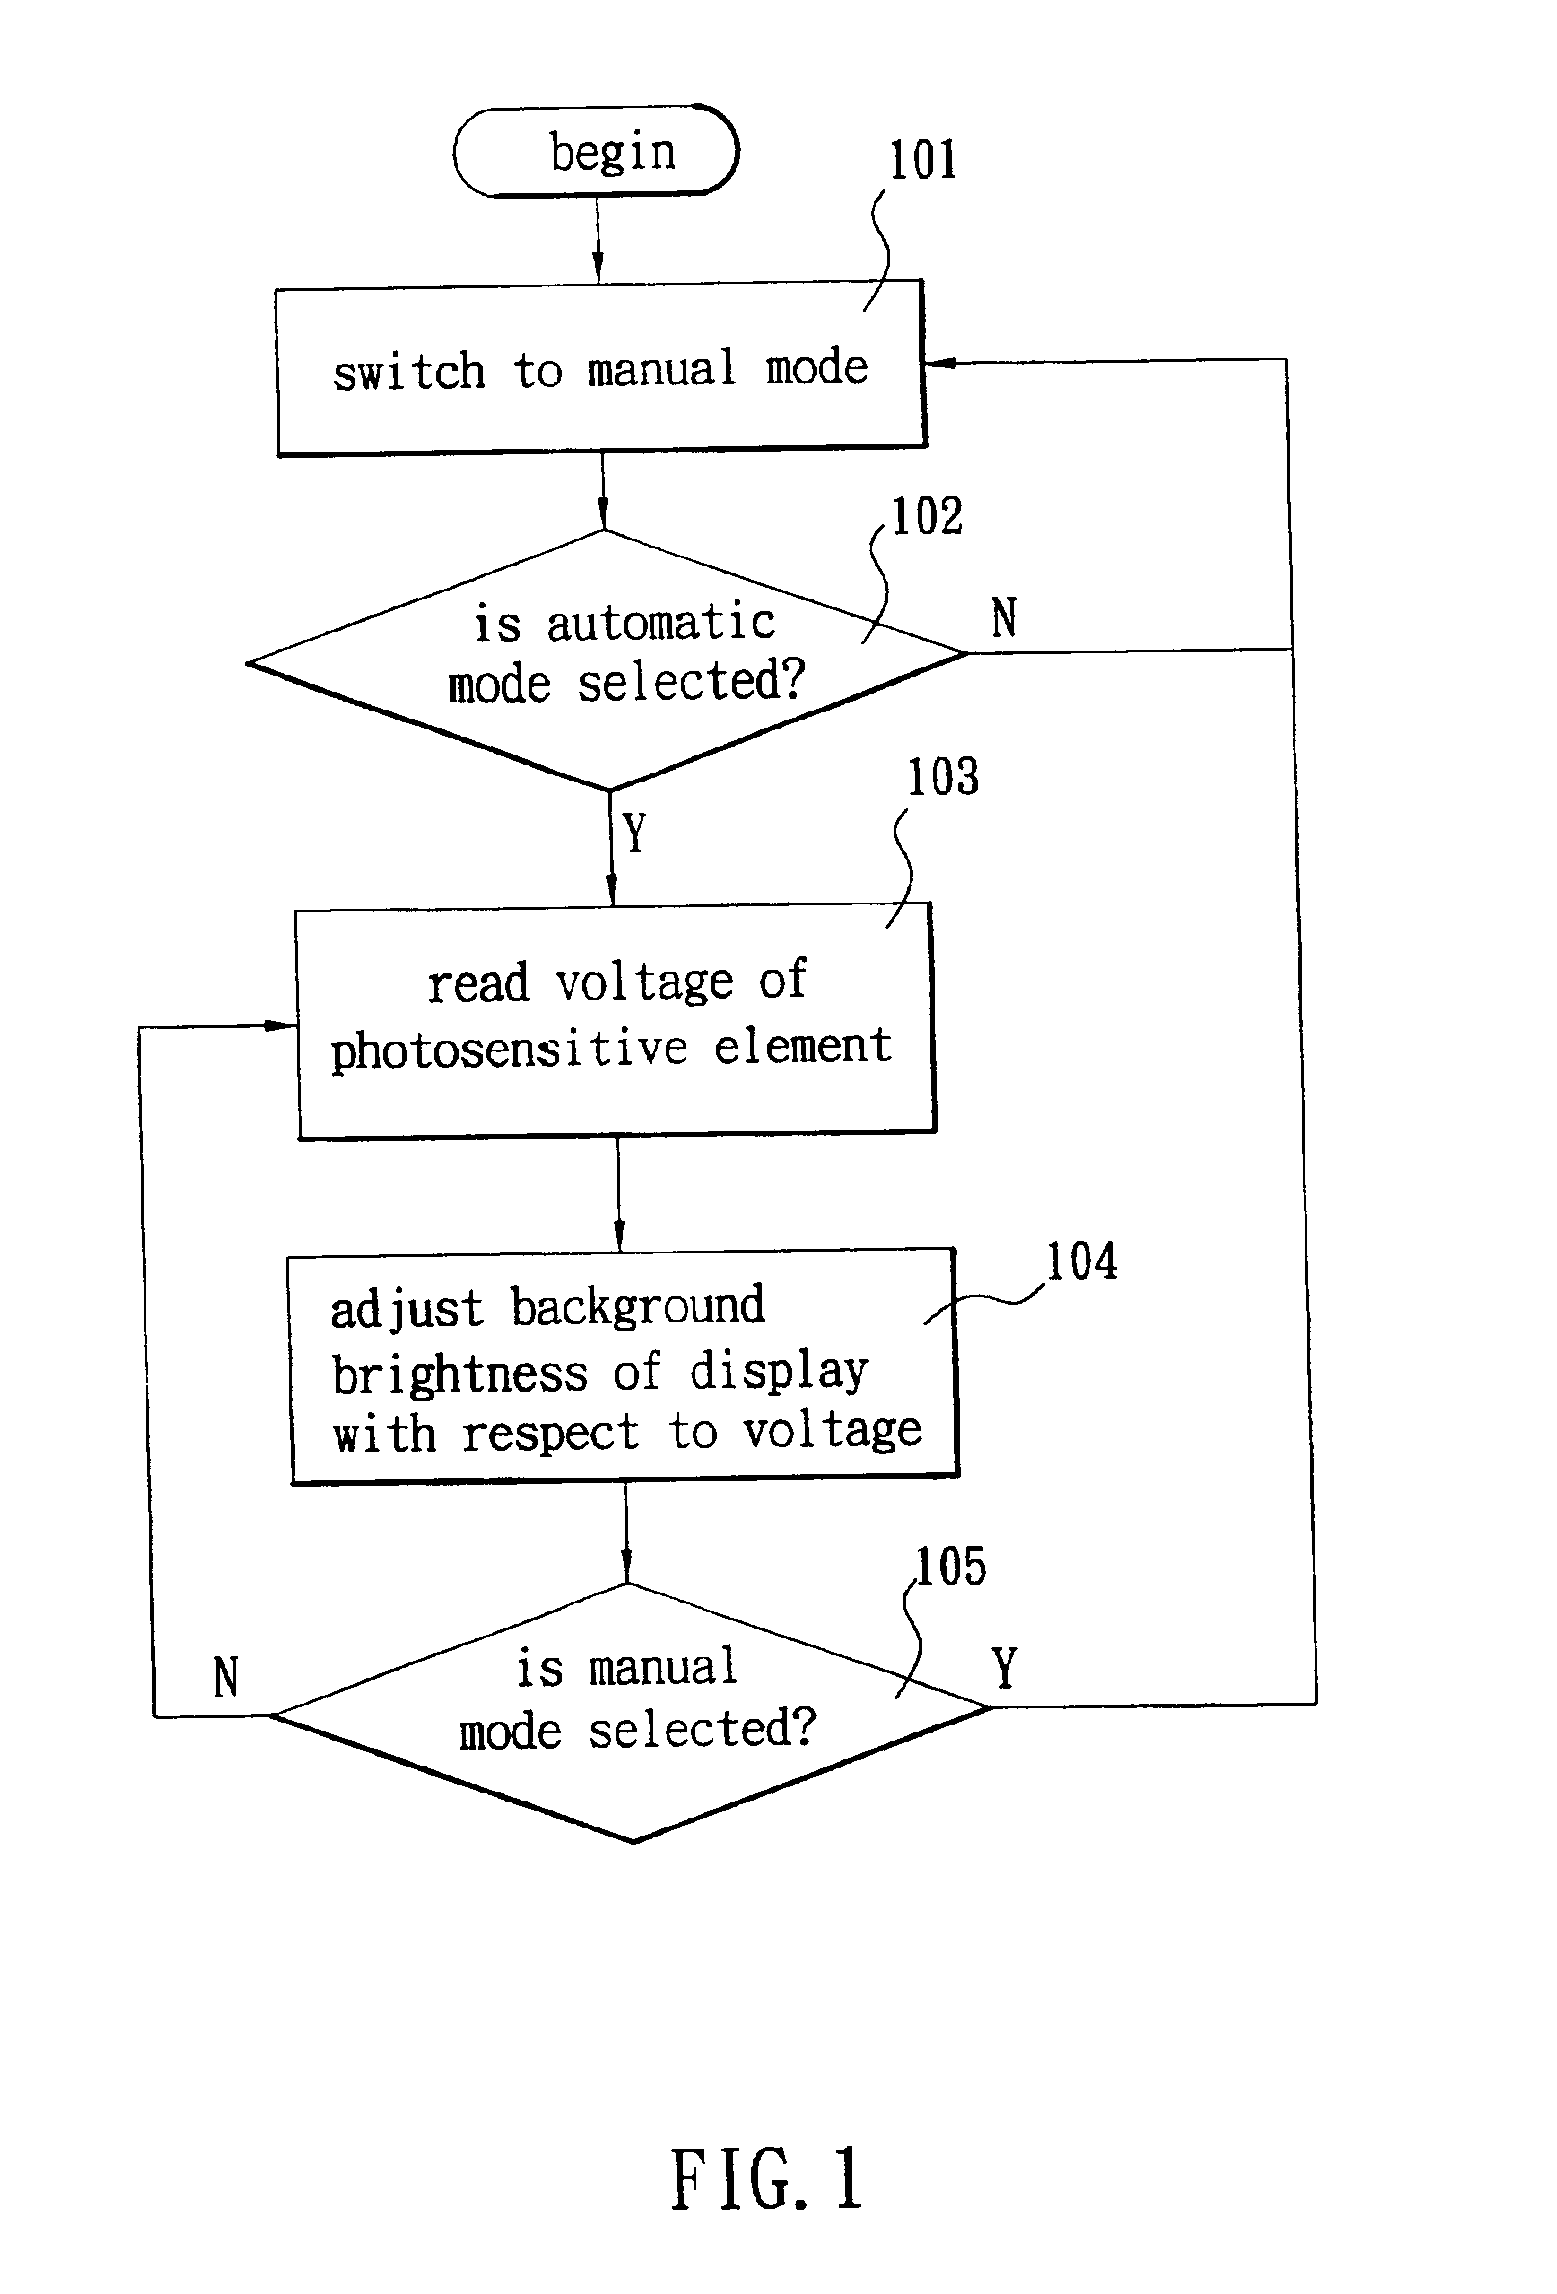 Method for automatically adjusting the background brightness of cellular phone display